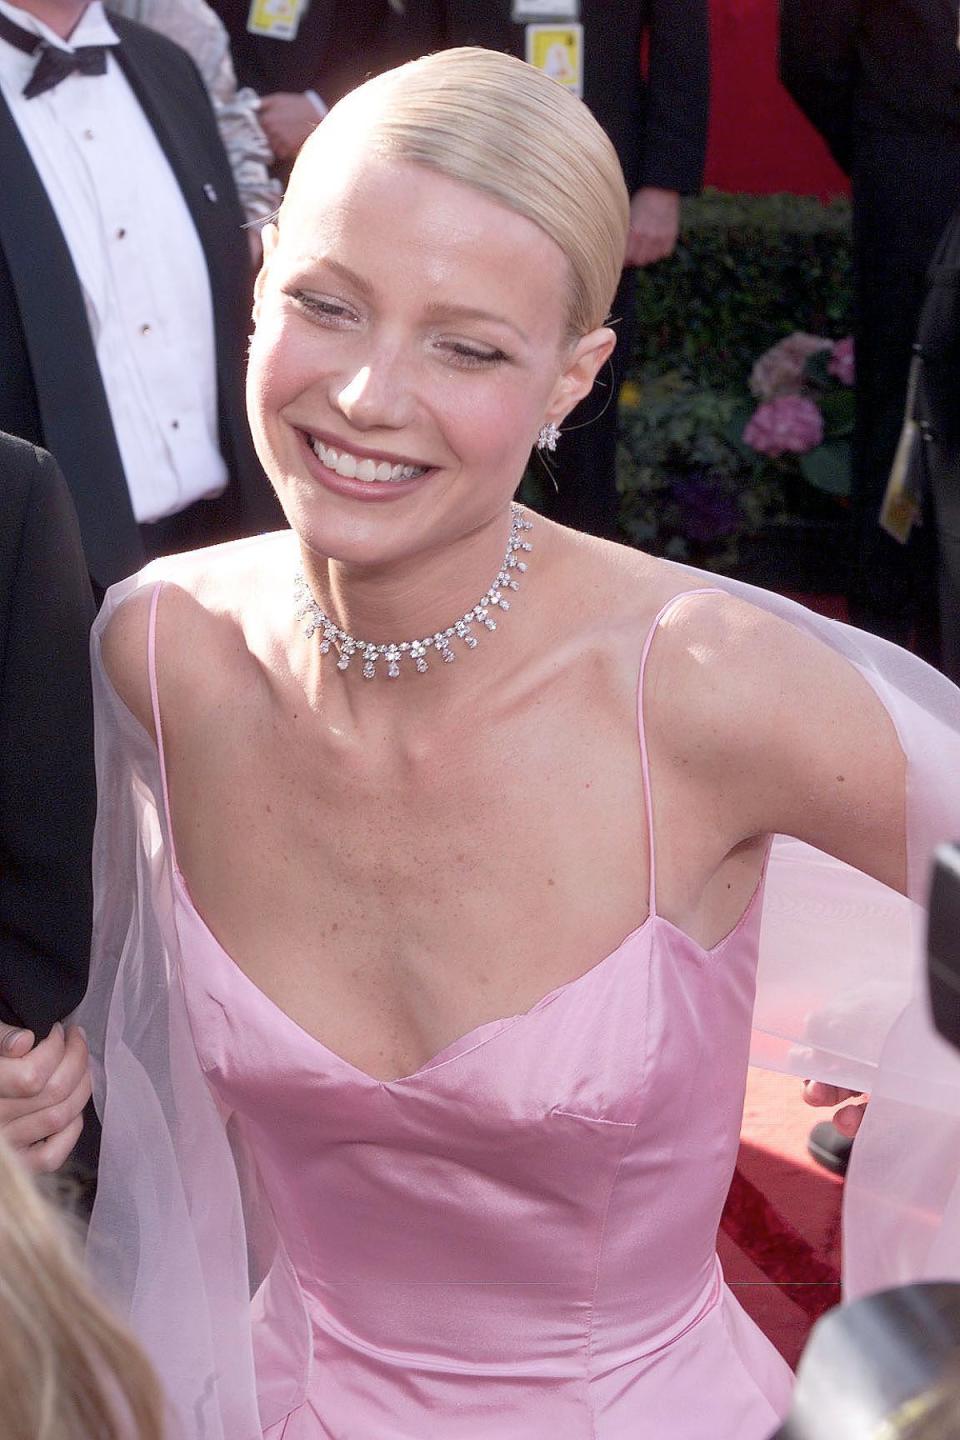 Paltrow at the 1999 Academy Awards, where she would go on to win Best Actress (Getty Images)